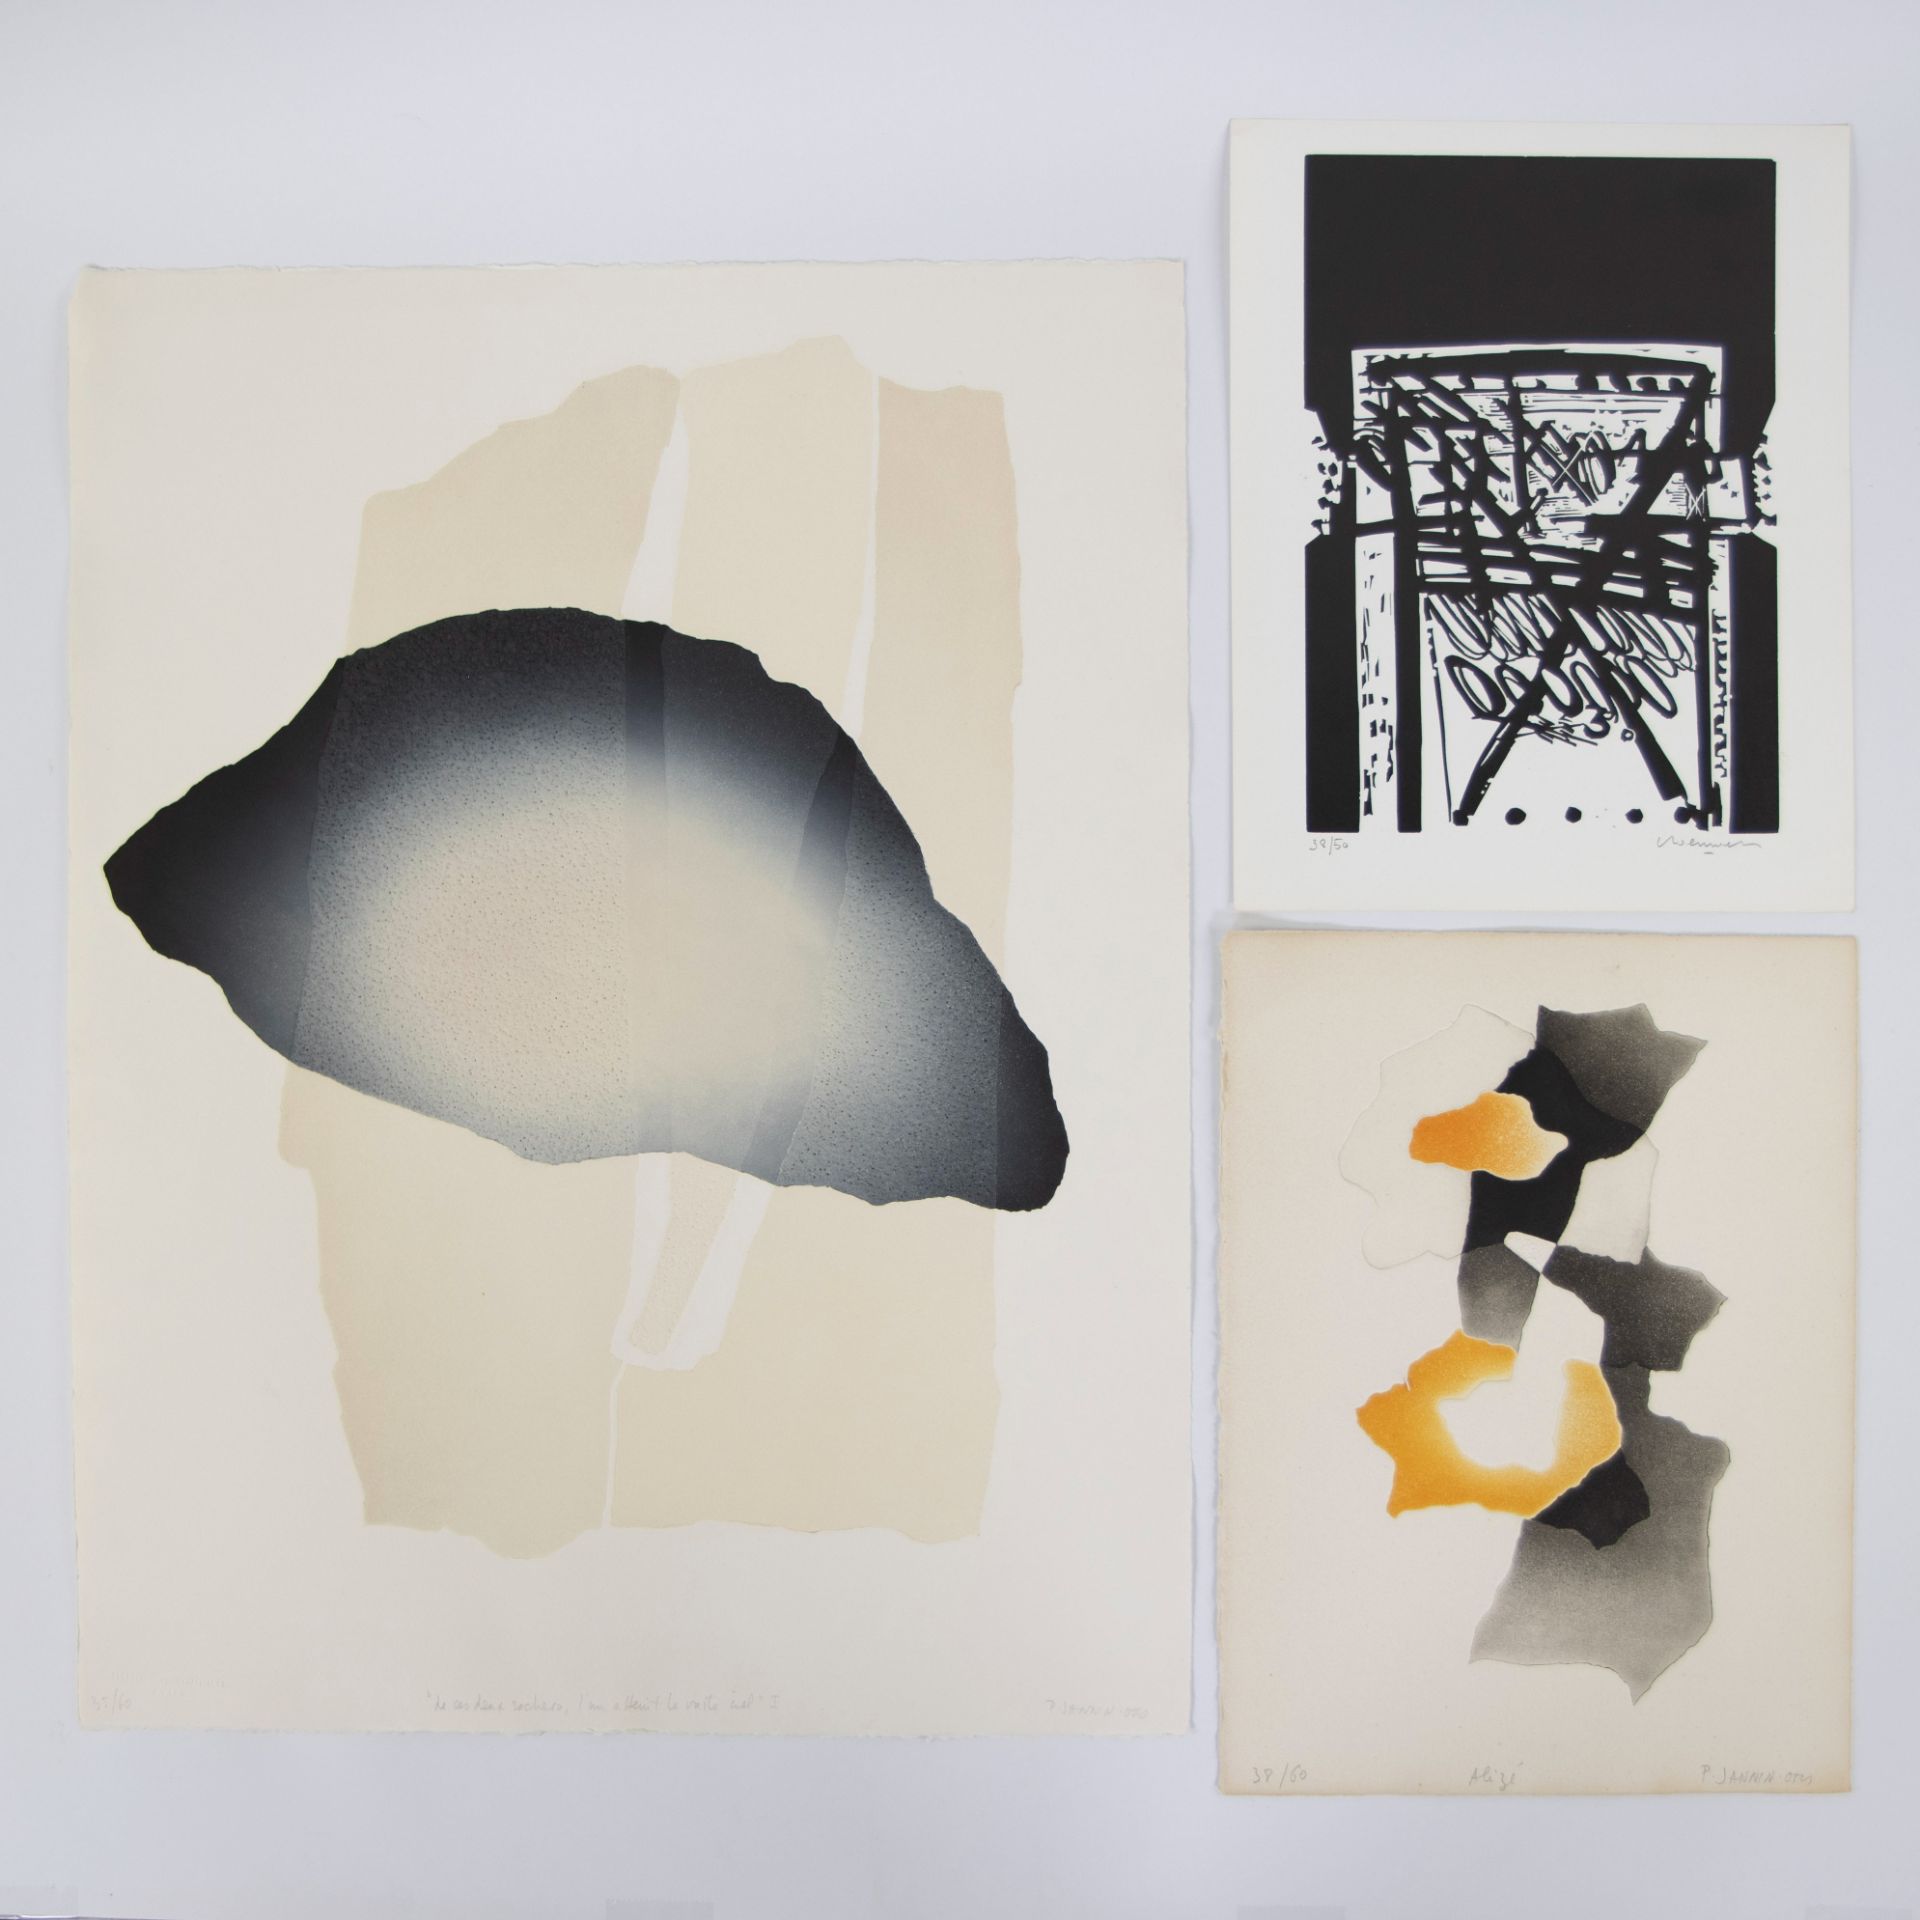 Collection of lithographs P. Jannin, Alizé and De ces deux rochers, signed and numbered in pencil en